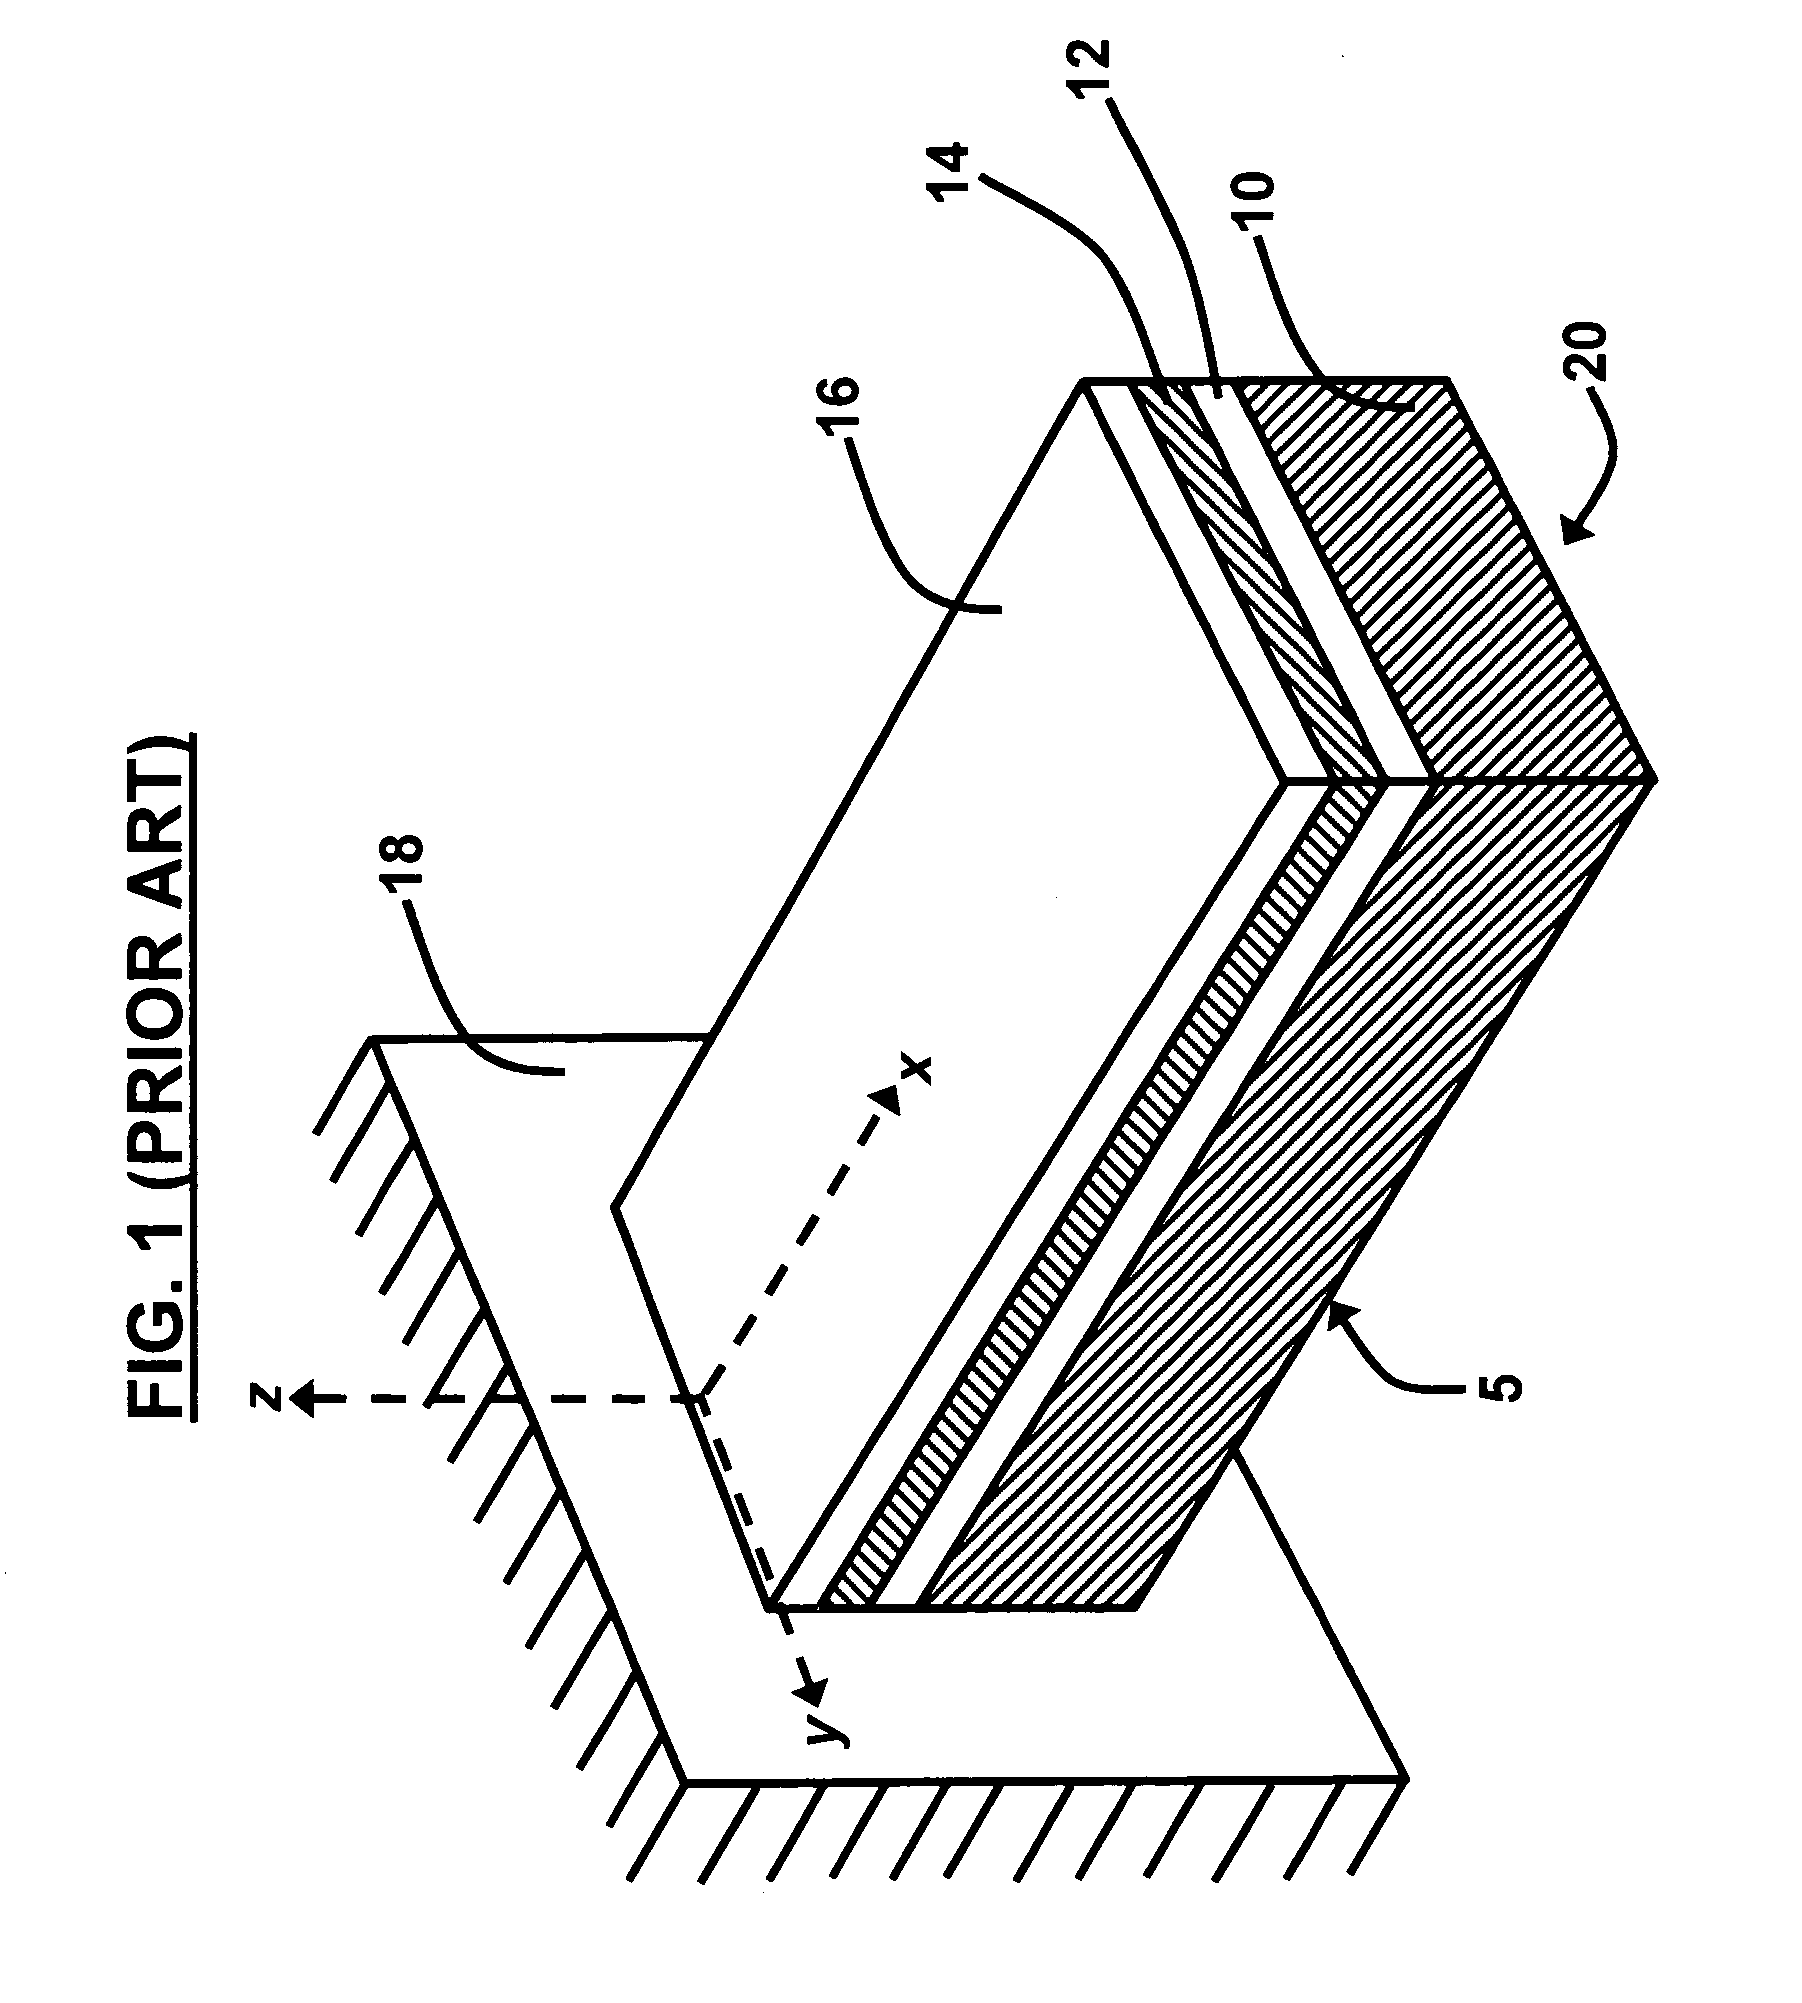 Lateral piezoelectric microelectromechanical system (MEMS) actuation and sensing device